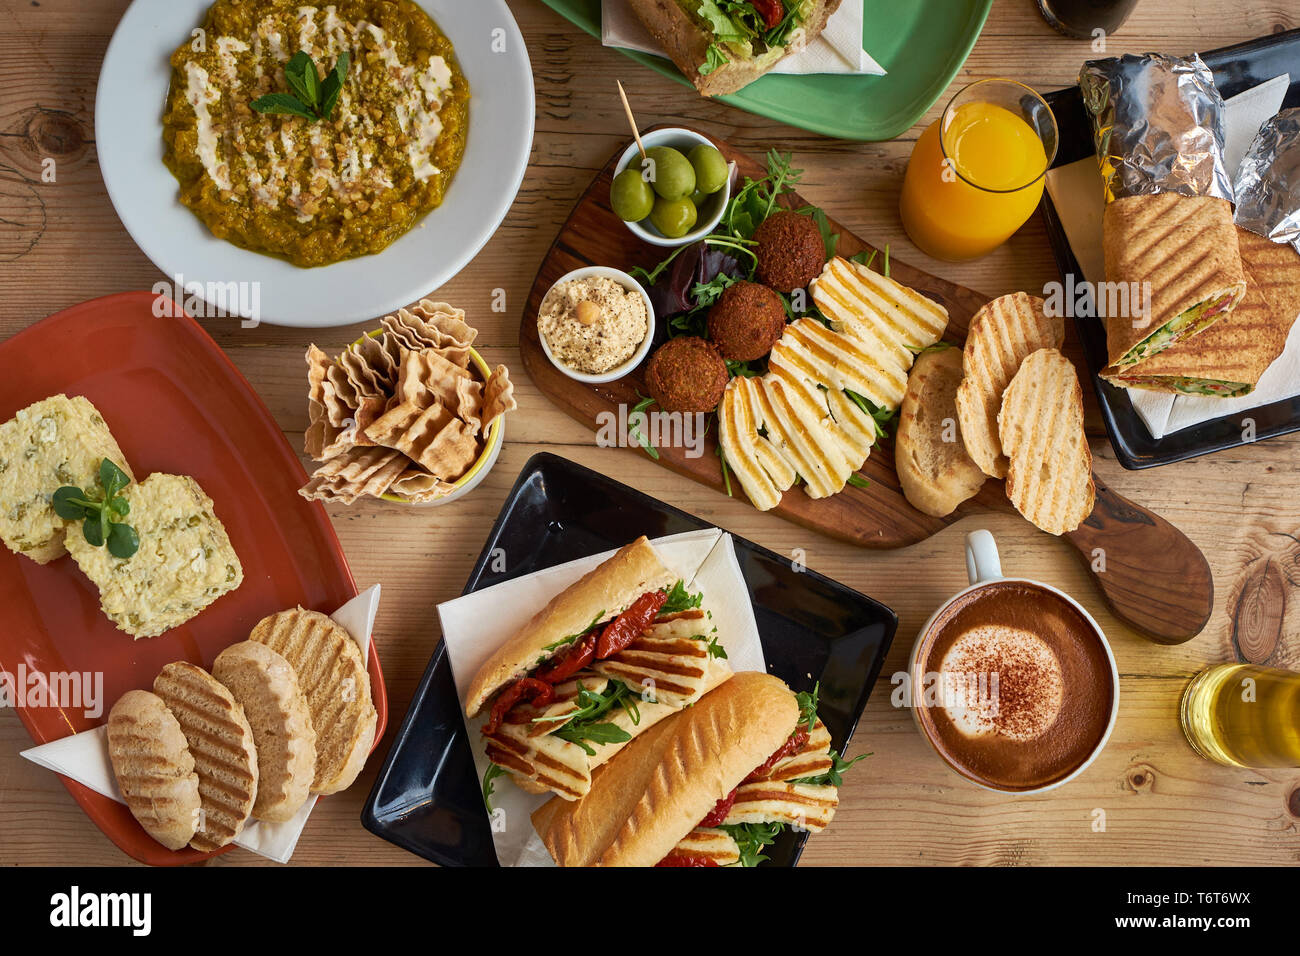 A spread of traditional Turkish food on a wooden table Stock Photo